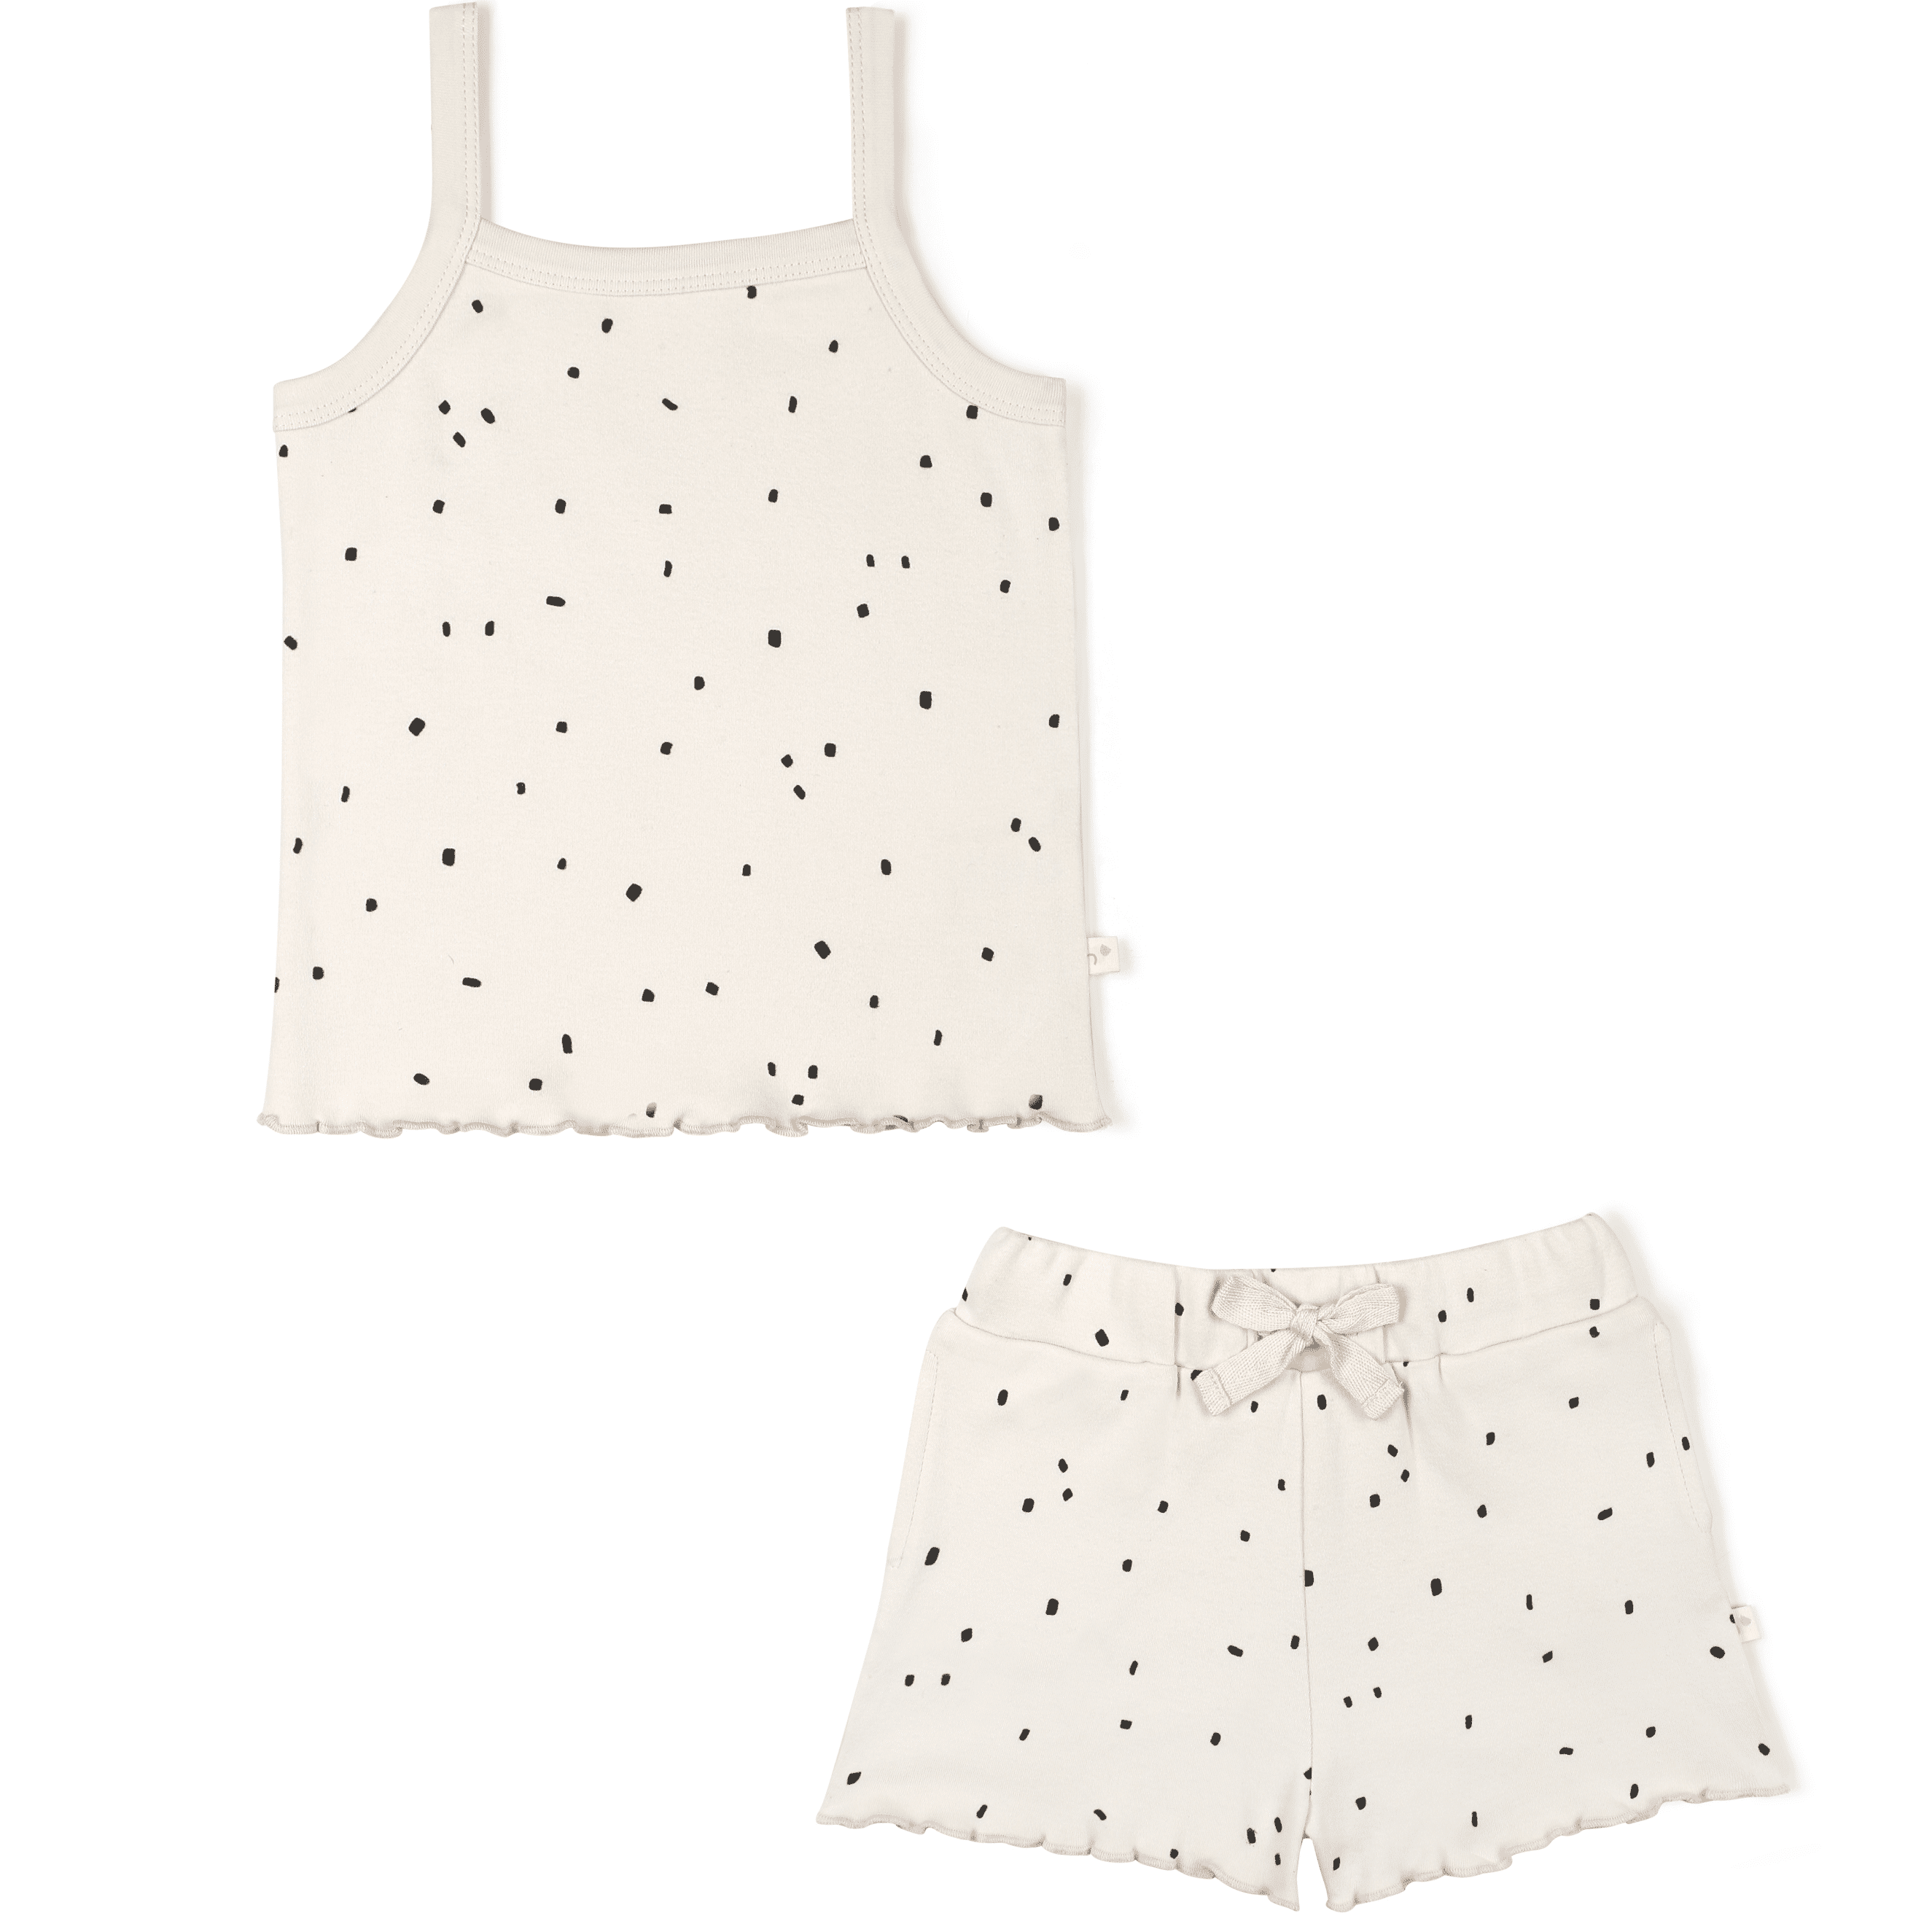 Matching Organic Spaghetti Top & Shorts Set - Pixie Dots for a toddler girl by Makemake Organics featuring a tank top and shorts with a drawstring waist, displayed on a white background.